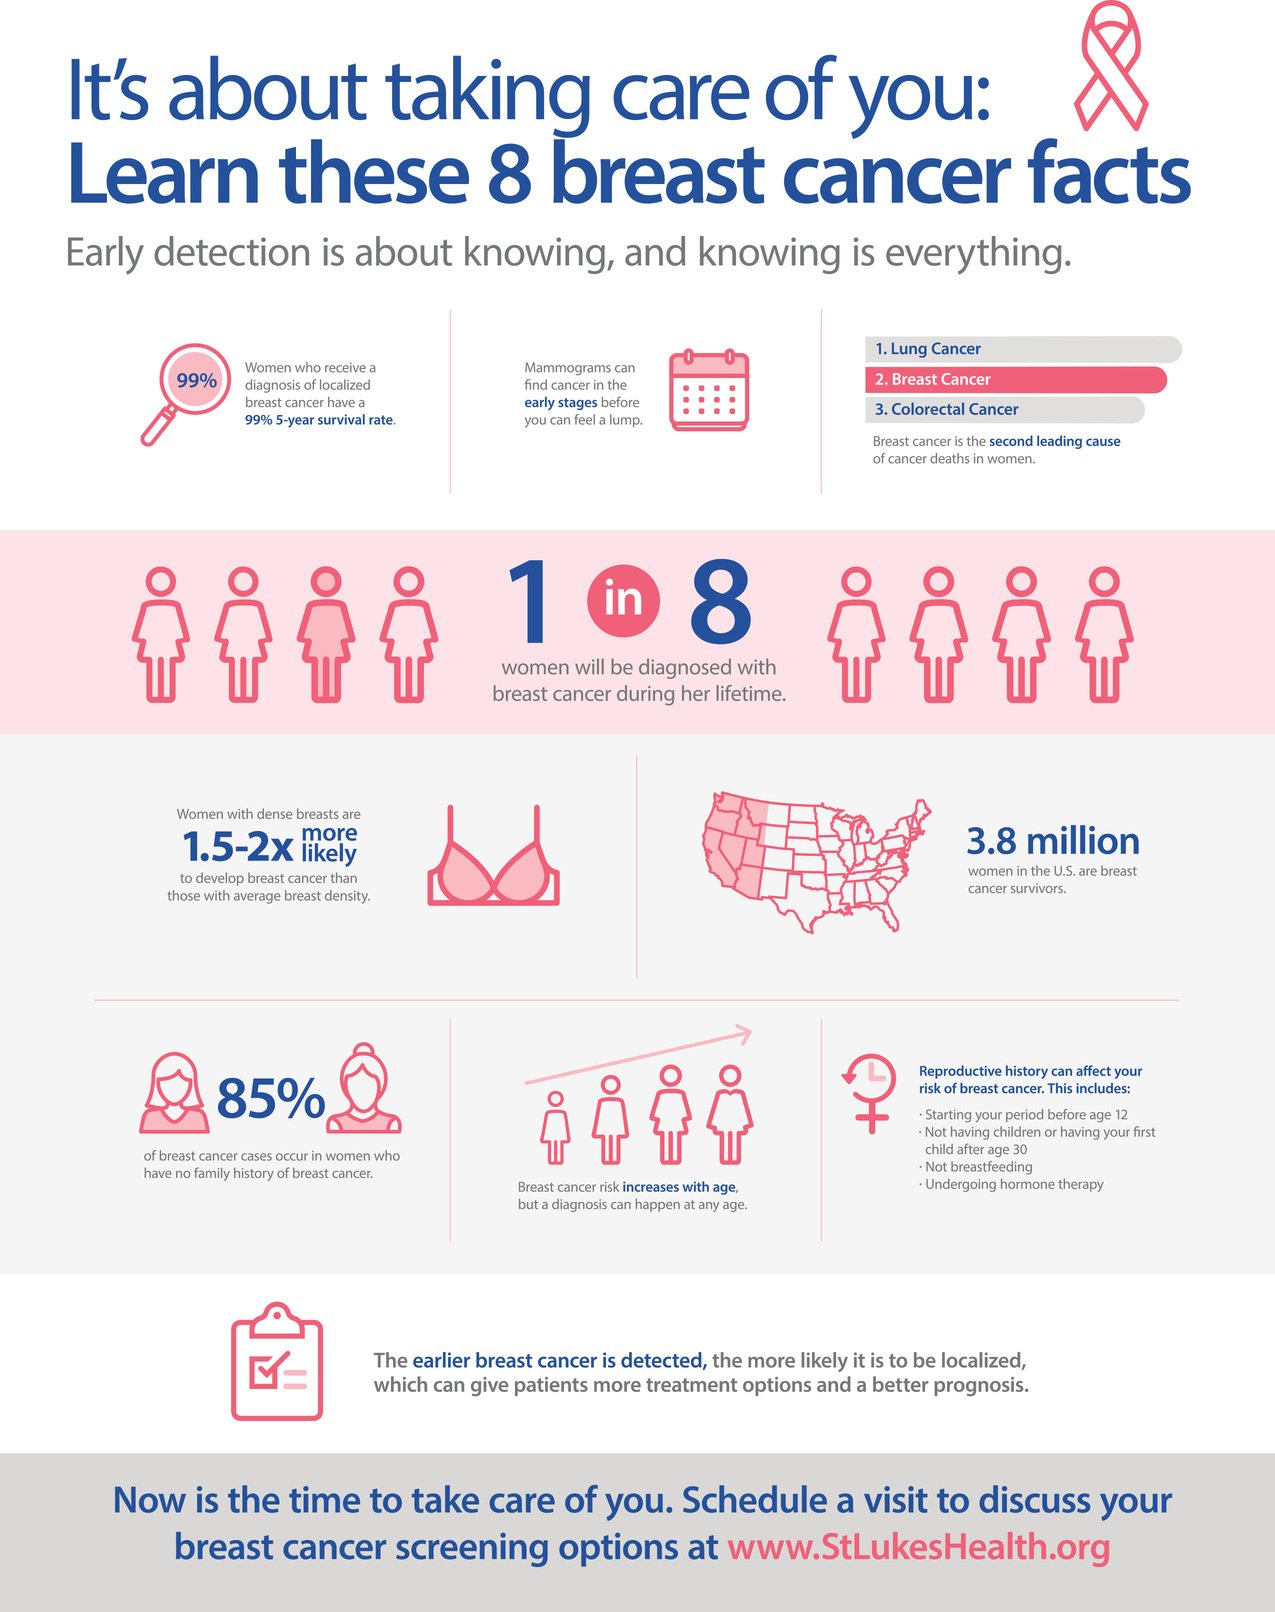 research topics about breast cancer